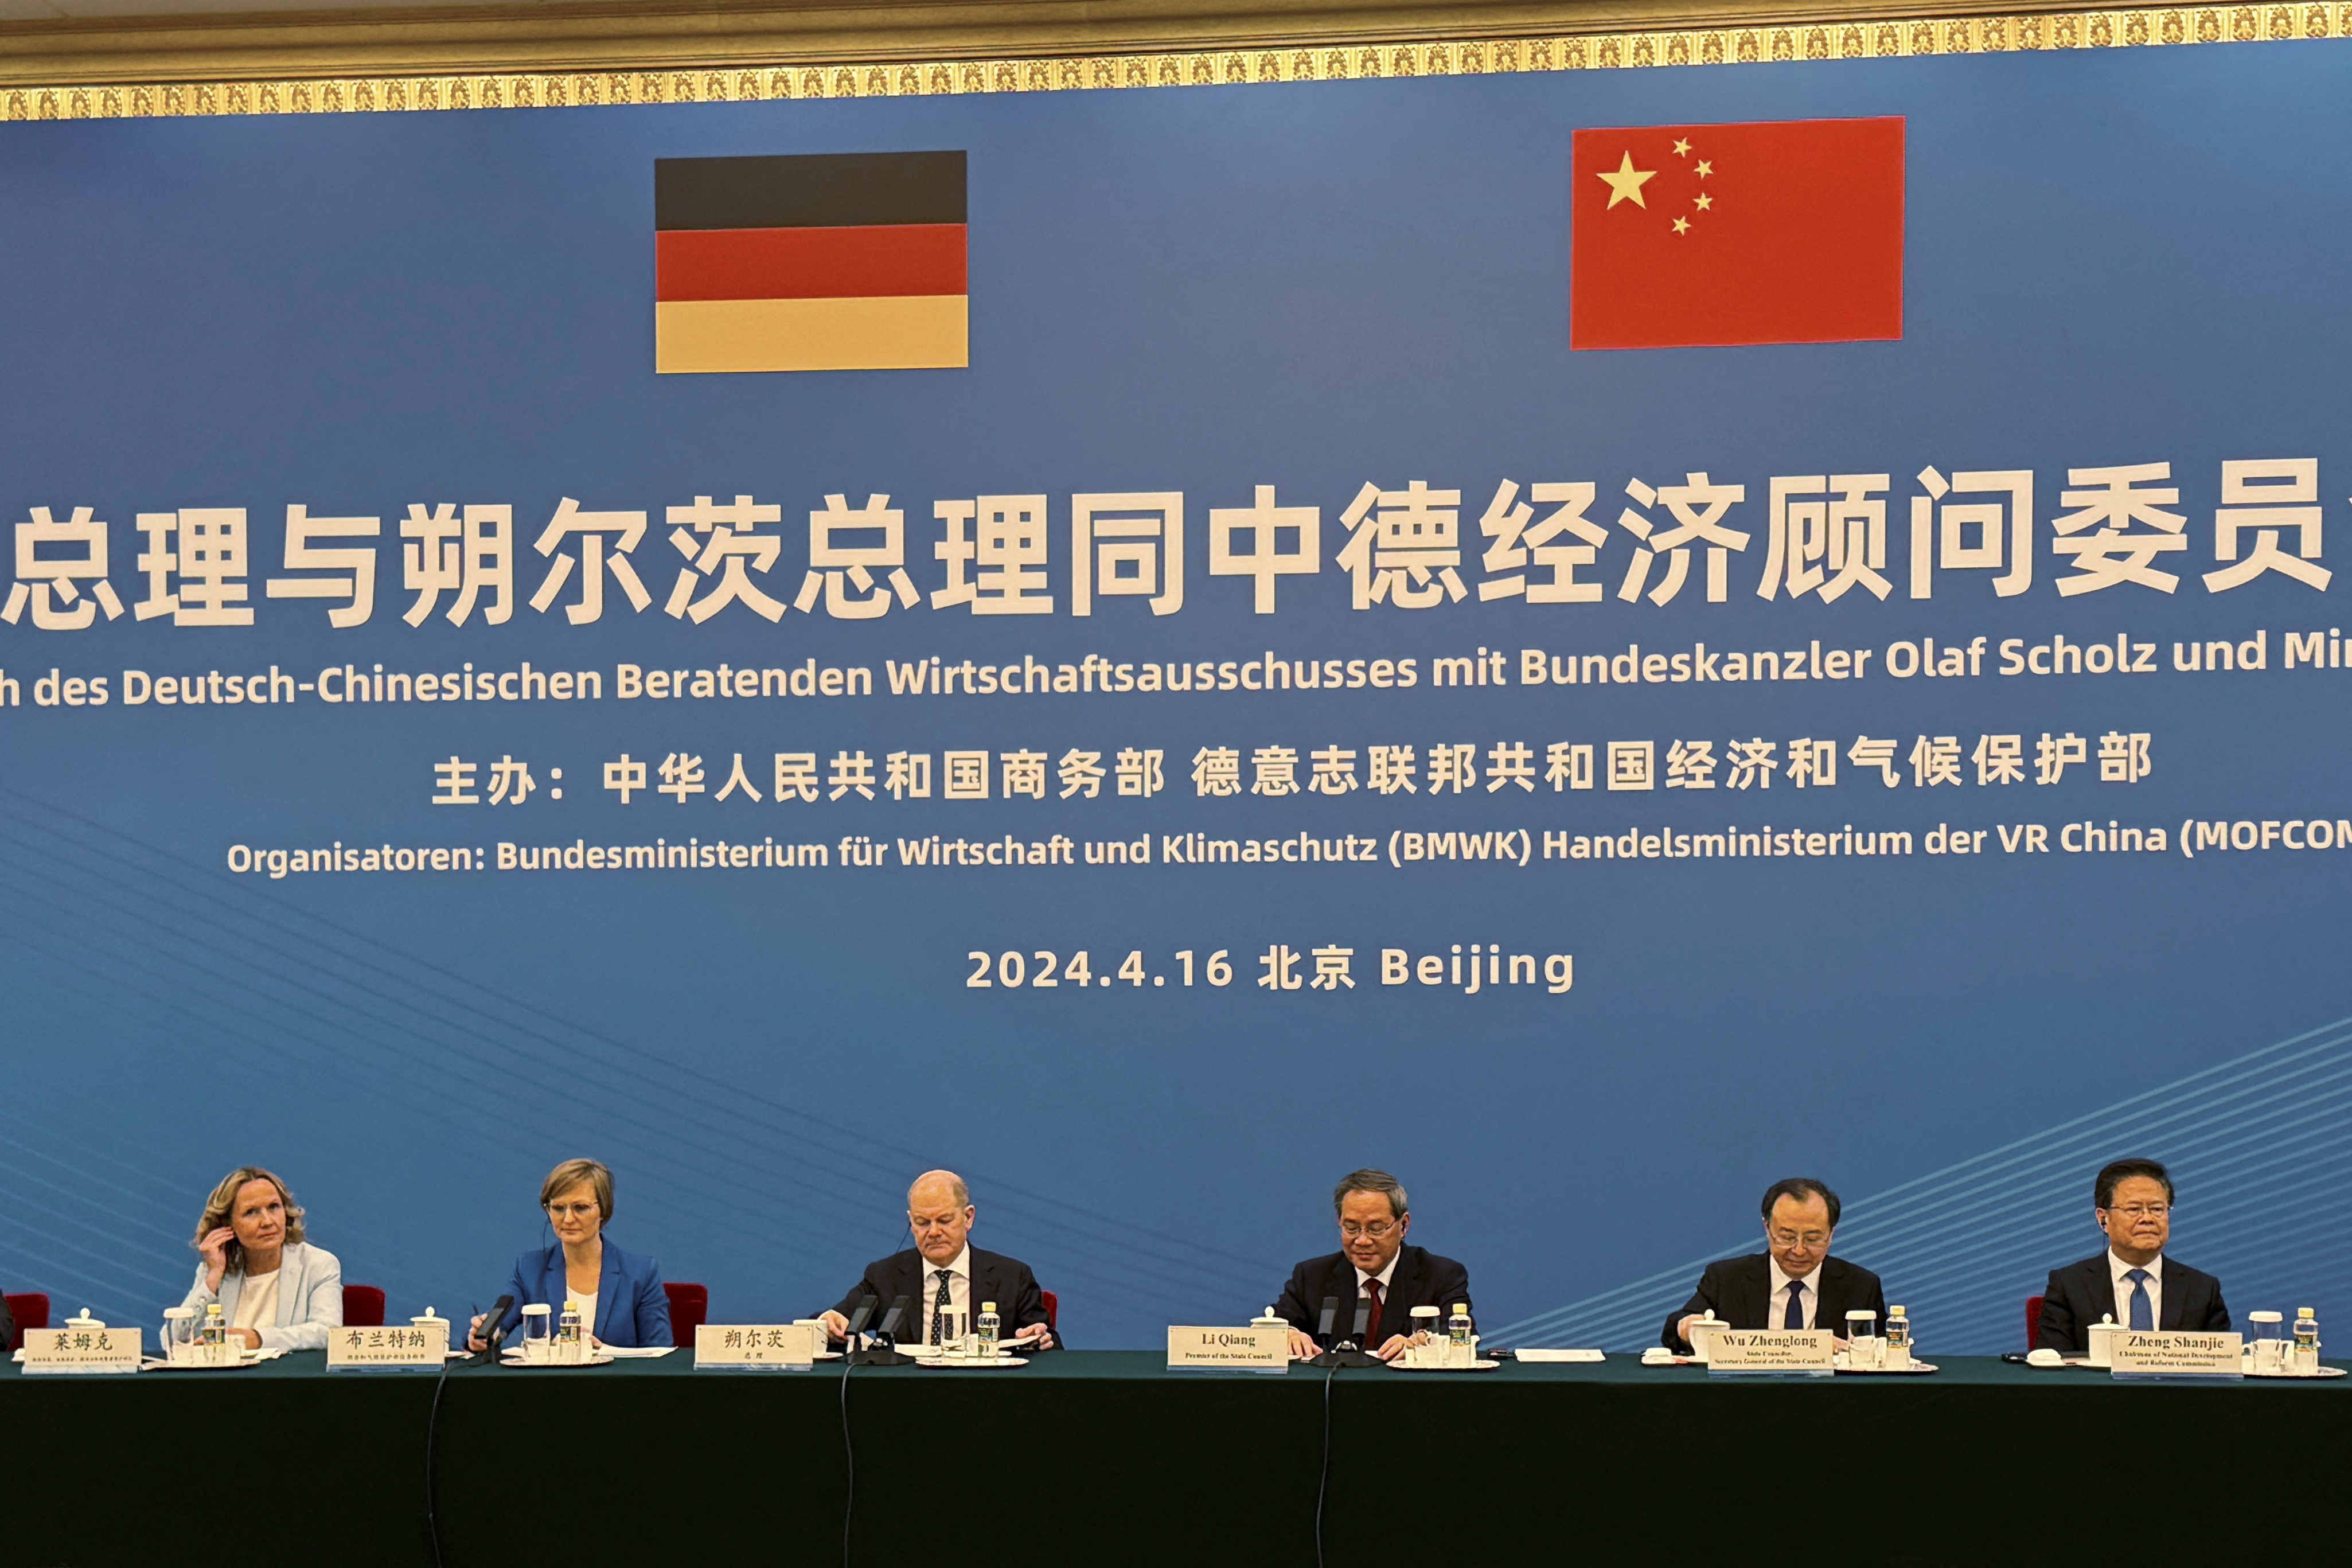 German Chancellor Olaf Scholz in China